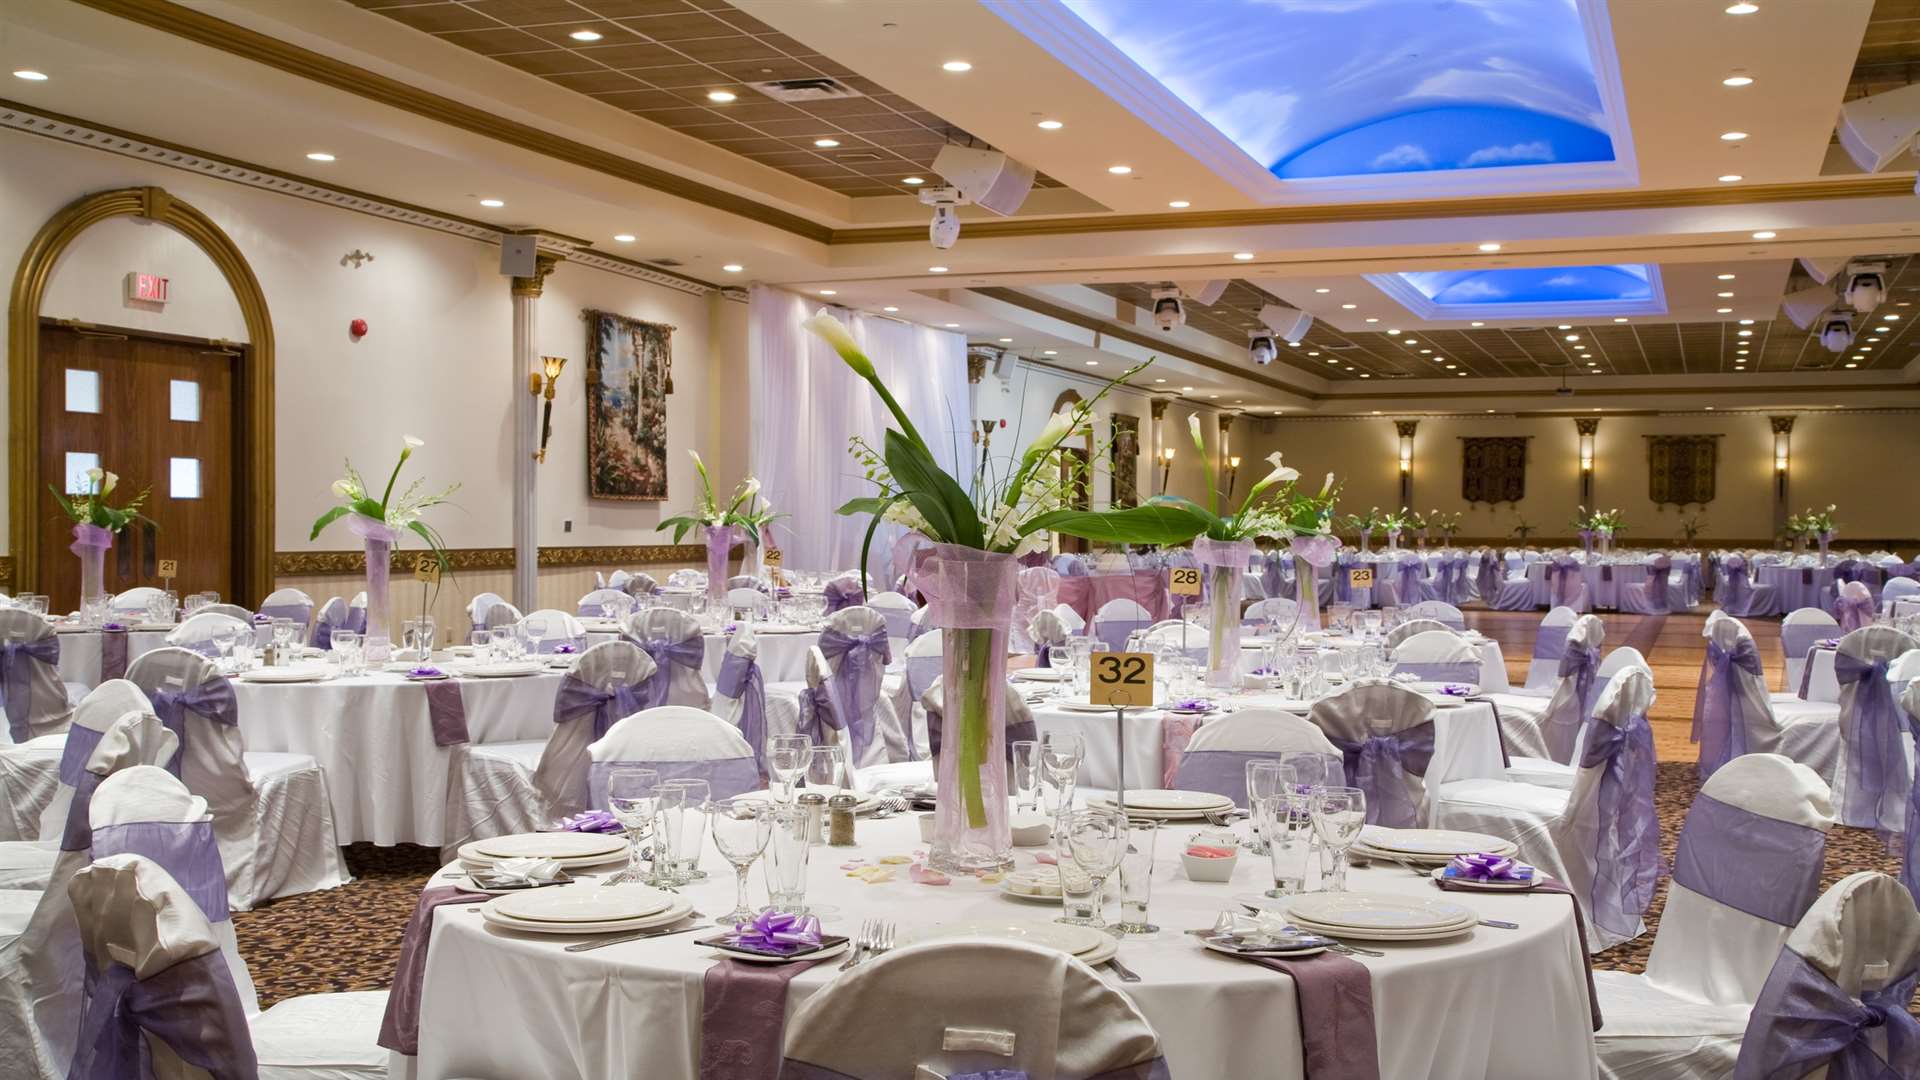 Your chosen reception venue may need to be big enough to accommodate daytime and additional evening guests